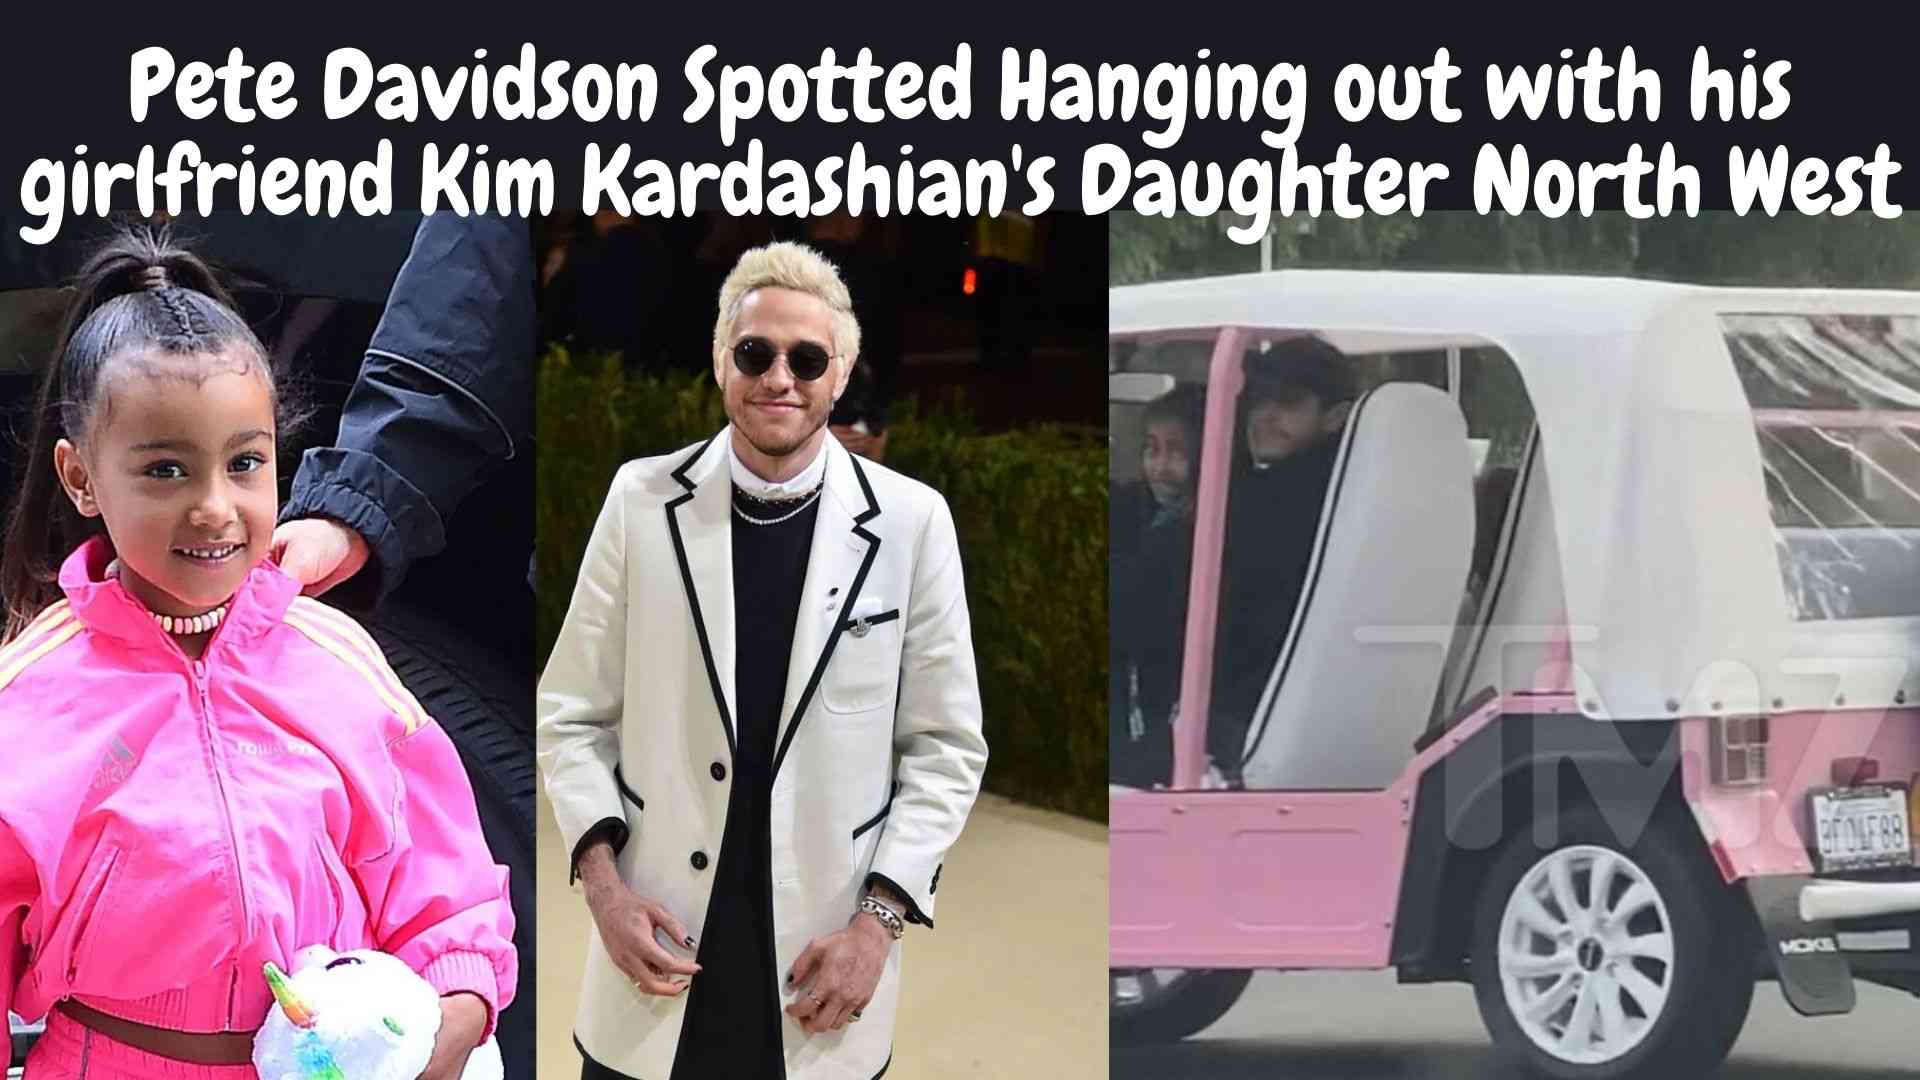 Pete Davidson Spotted Hanging out with his girlfriend Kim Kardashian's Daughter North West Wallpaper and images